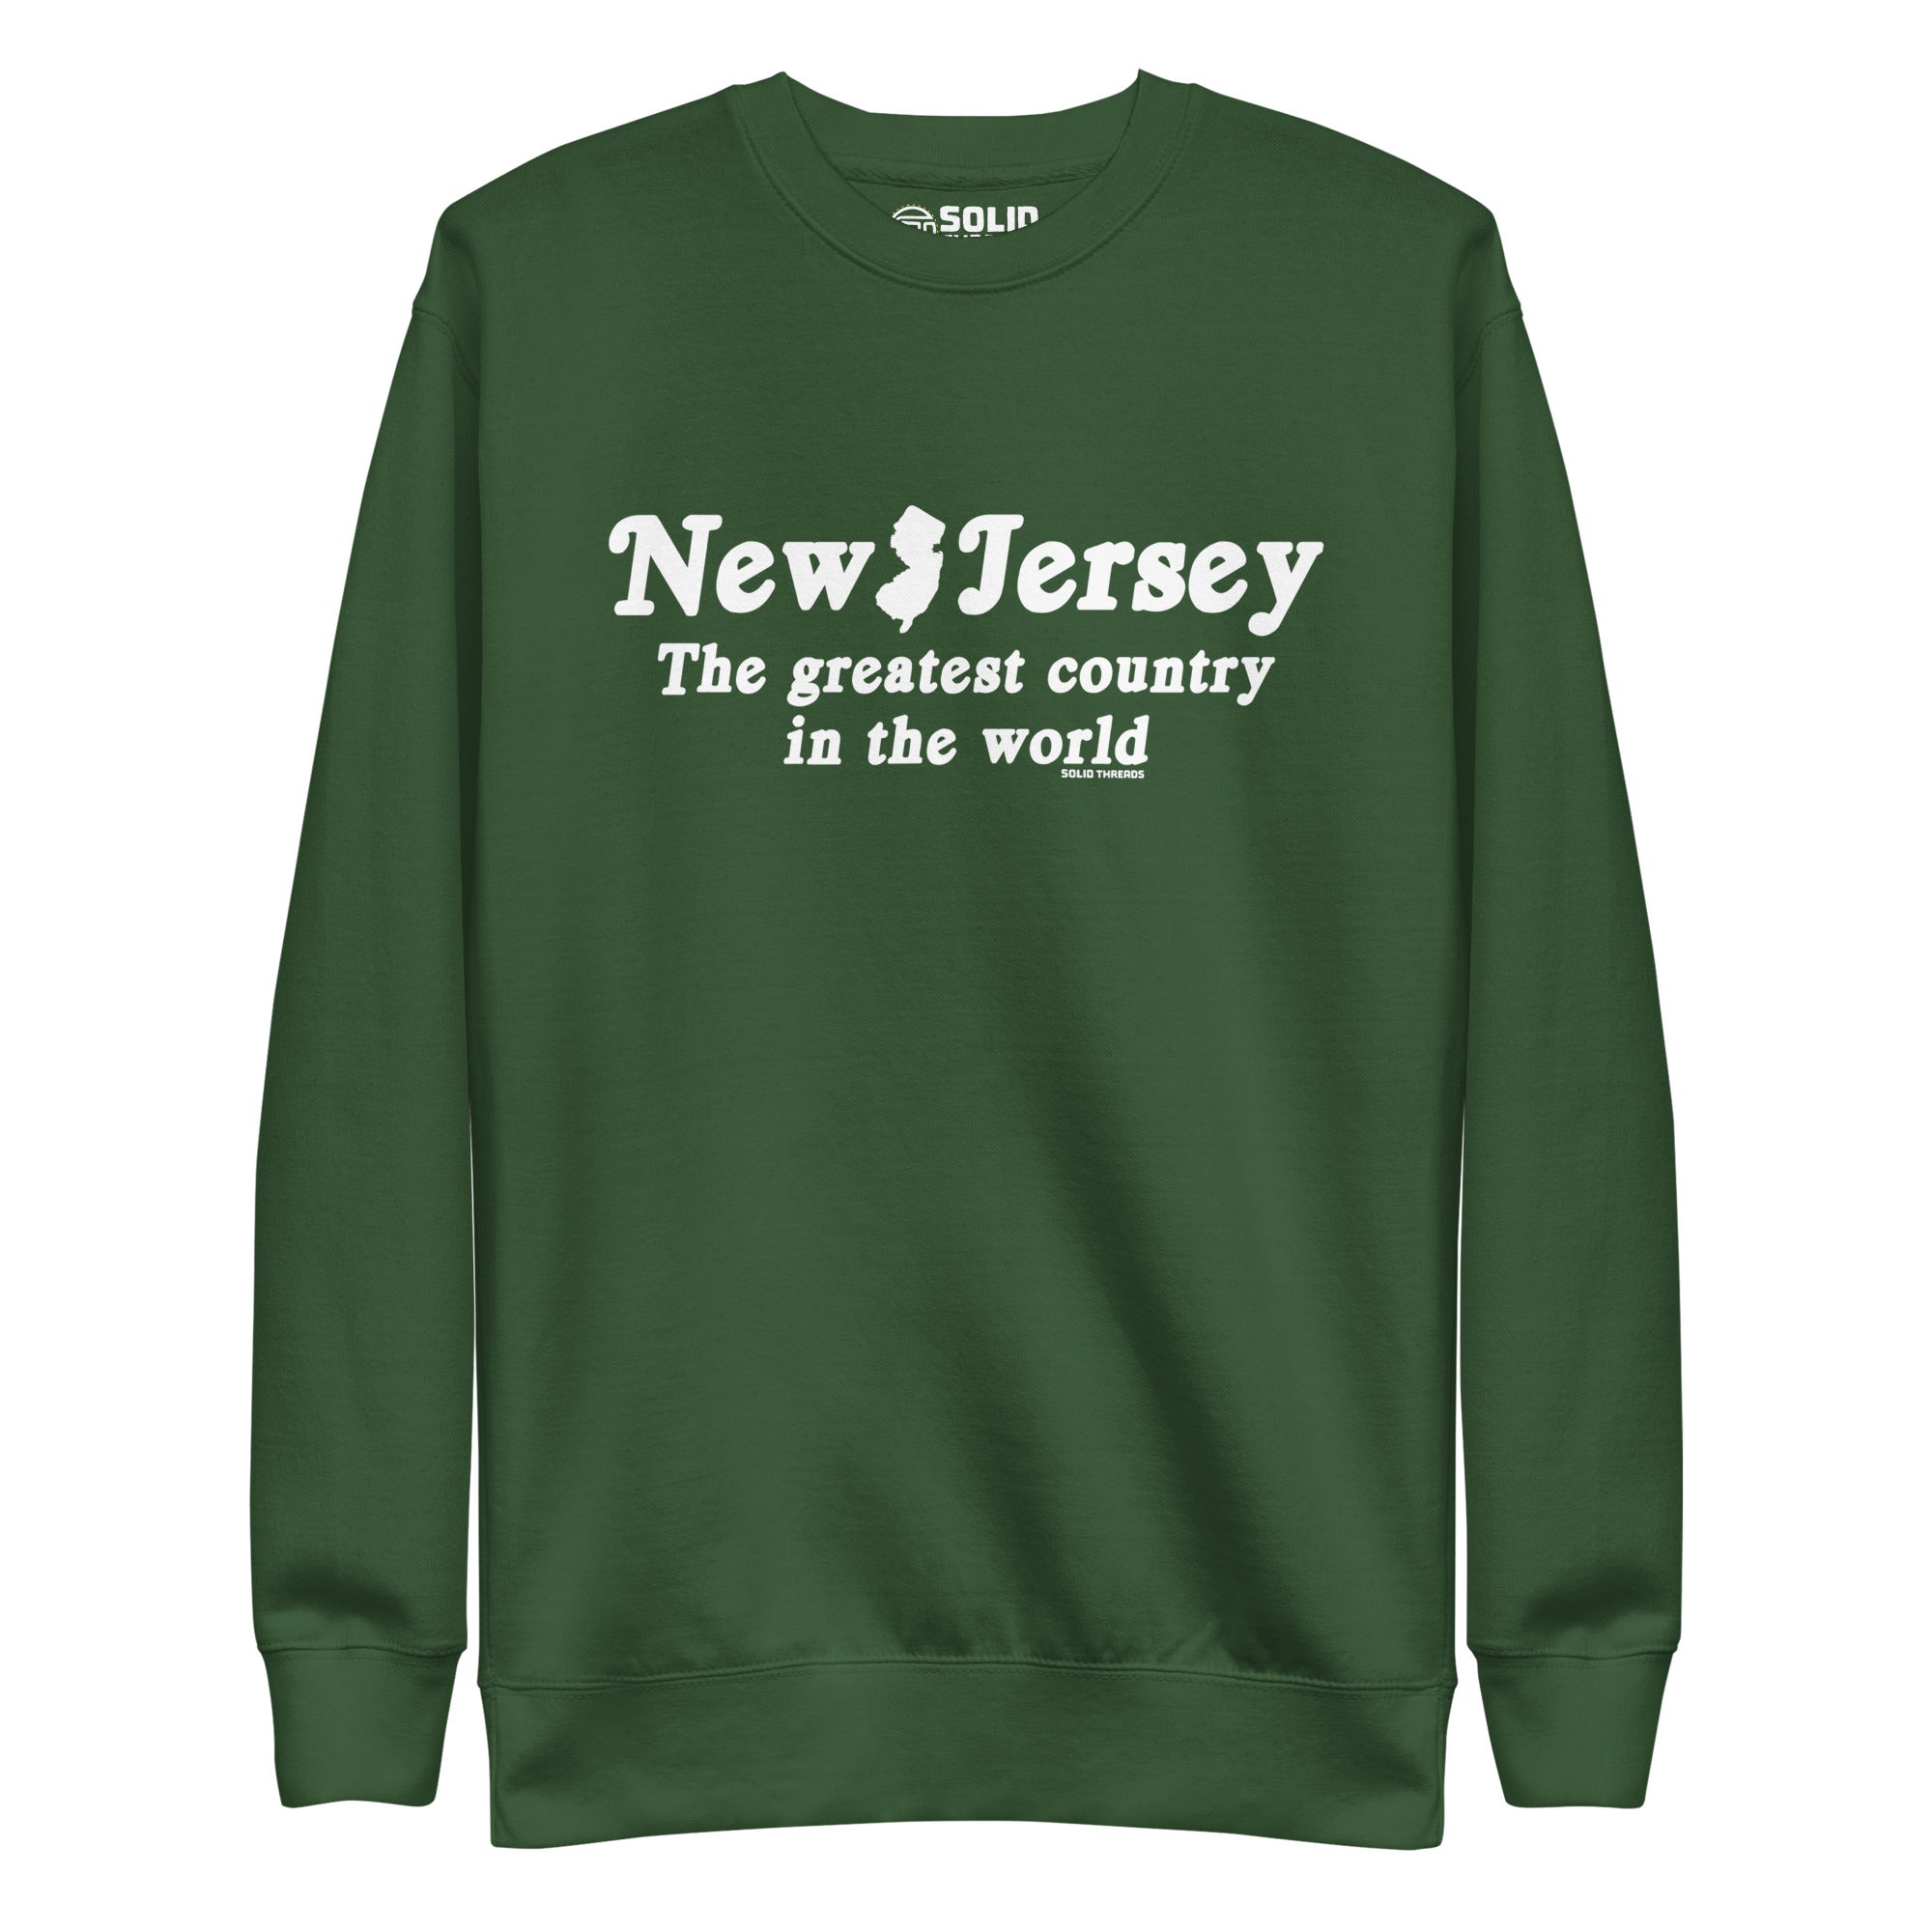 New Jersey The Greatest Country In The World Vintage Classic Sweatshirt | Funny Garden State Fleece | Solid Threads